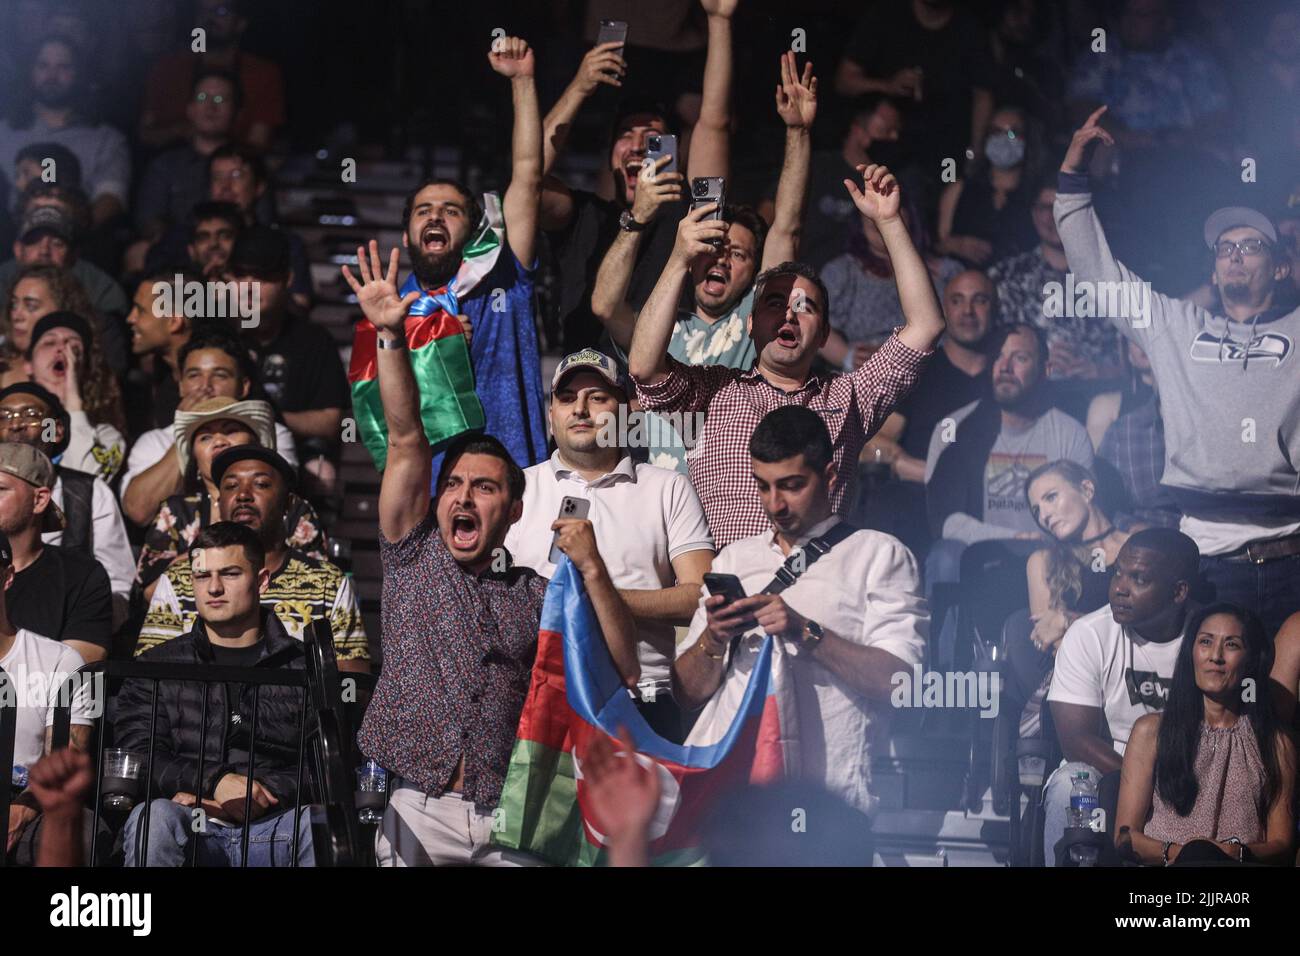 Fans react to Tofiq Musayev’s defeating of Sidney Outlaw by way of knock out in the first round of their fight at Bellator 283 from the Emerald Queen Stock Photo